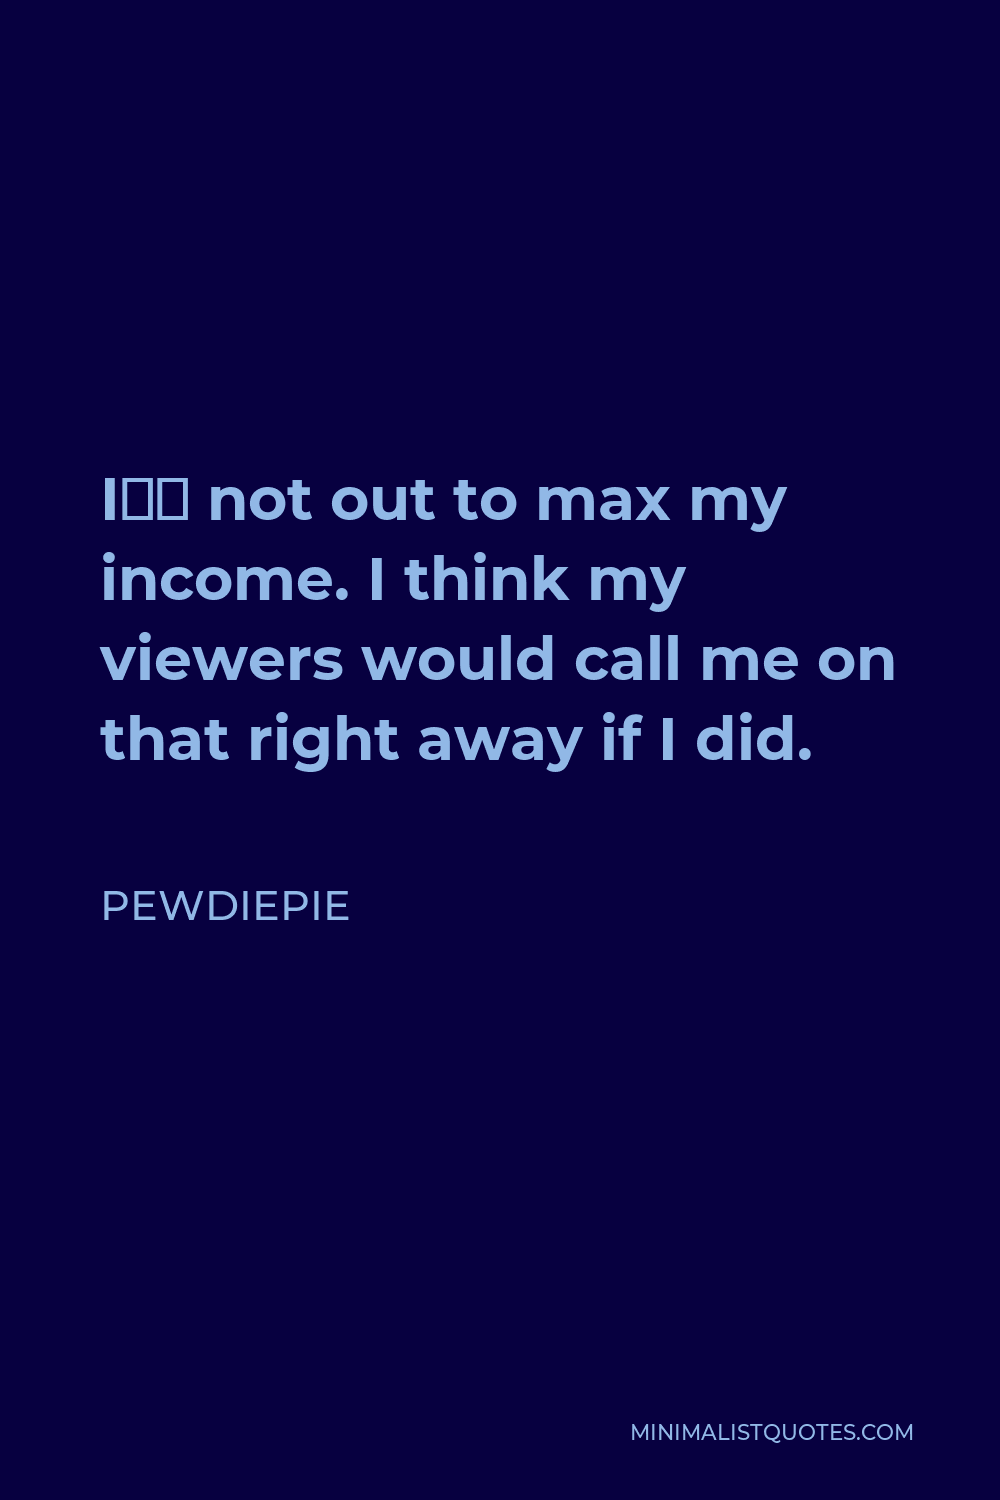 PewDiePie Quote - I’m not out to max my income. I think my viewers would call me on that right away if I did.